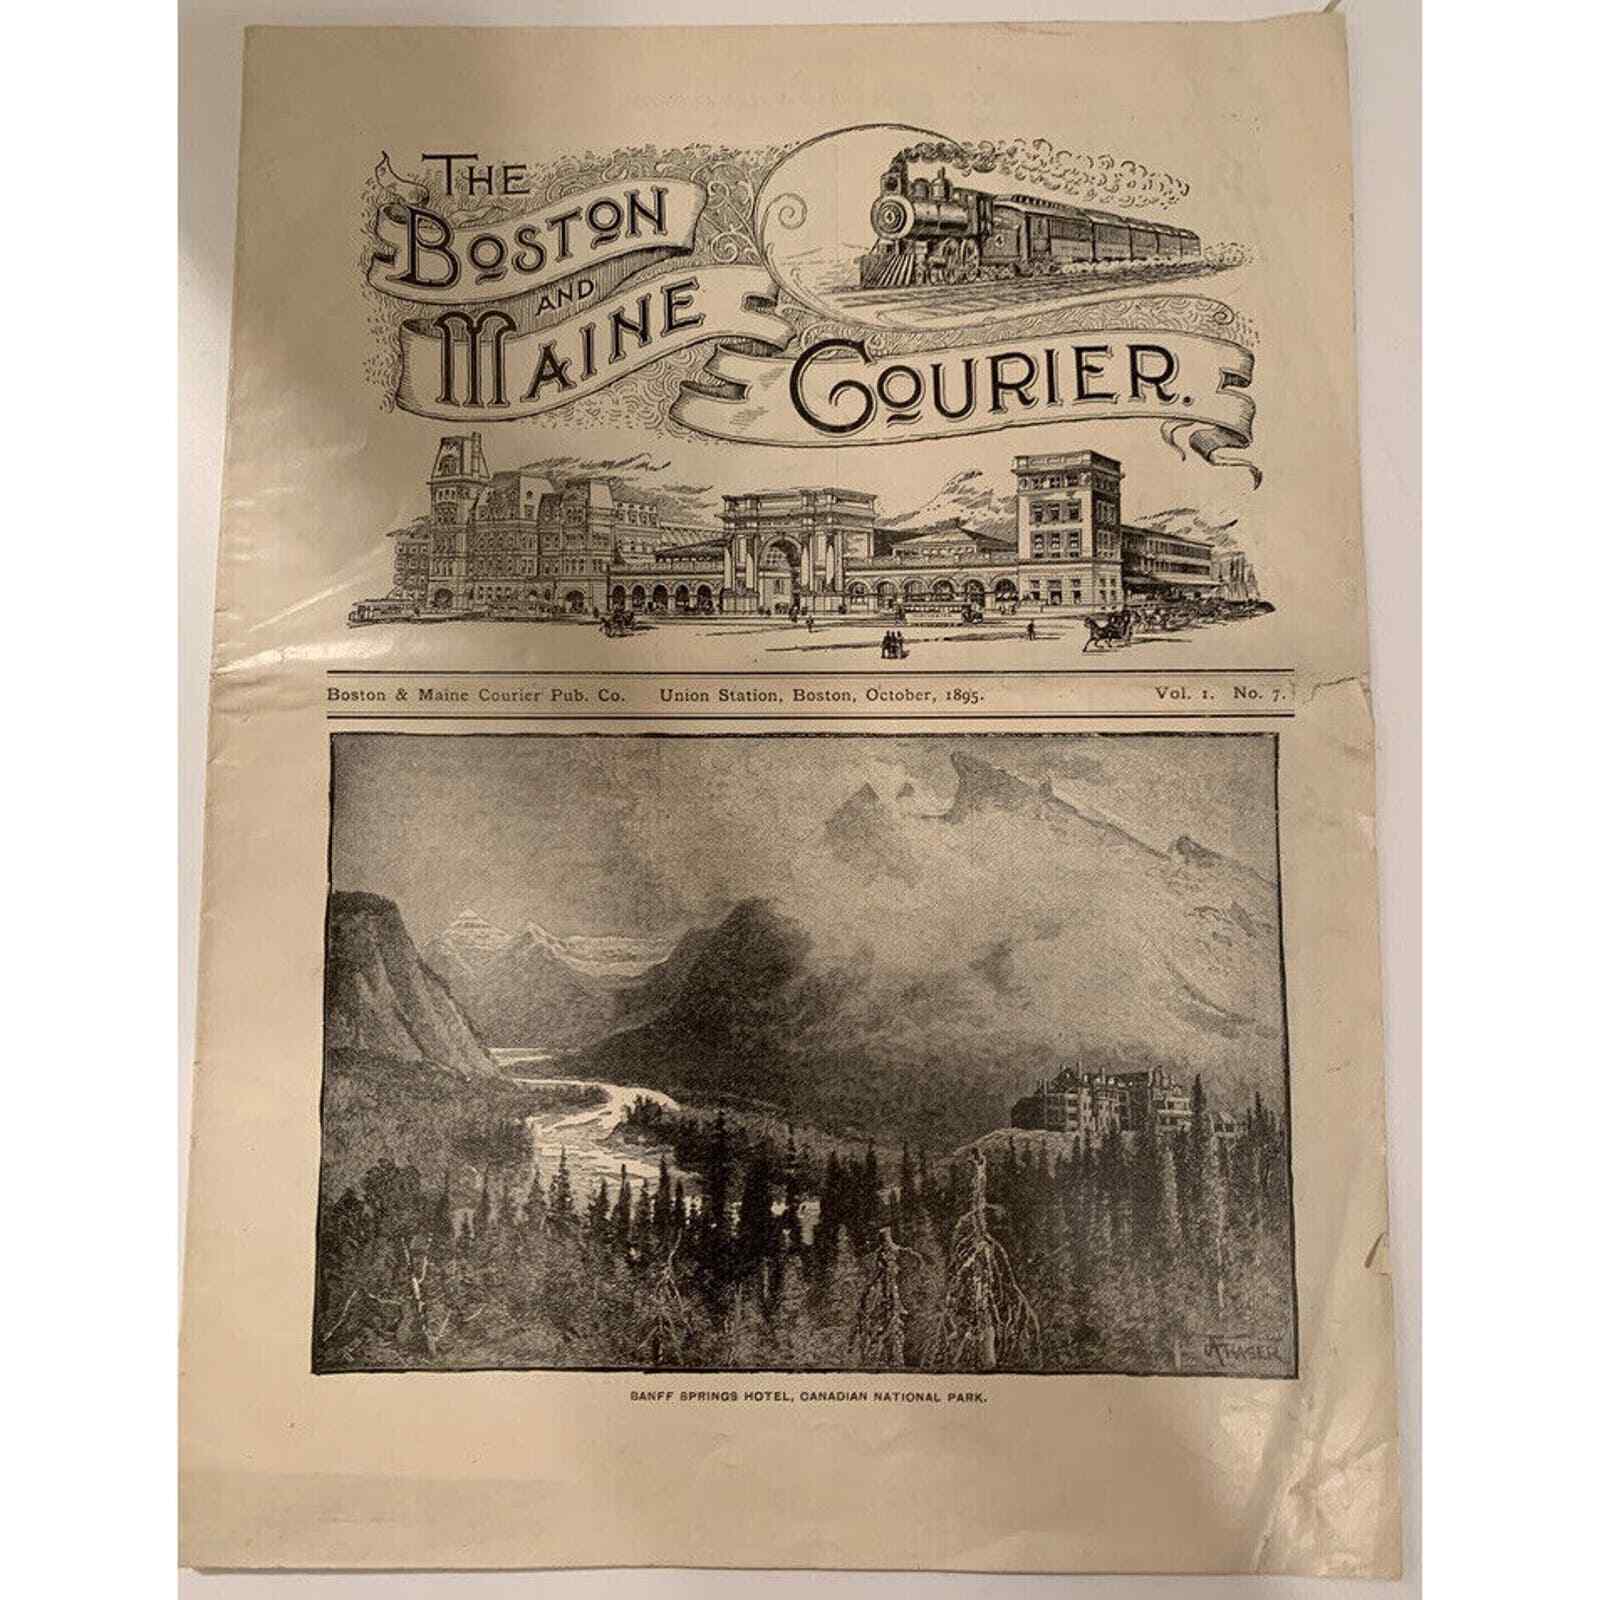 The Boston and Maine Gourier. October 1895 Vol. 1 No. 7.